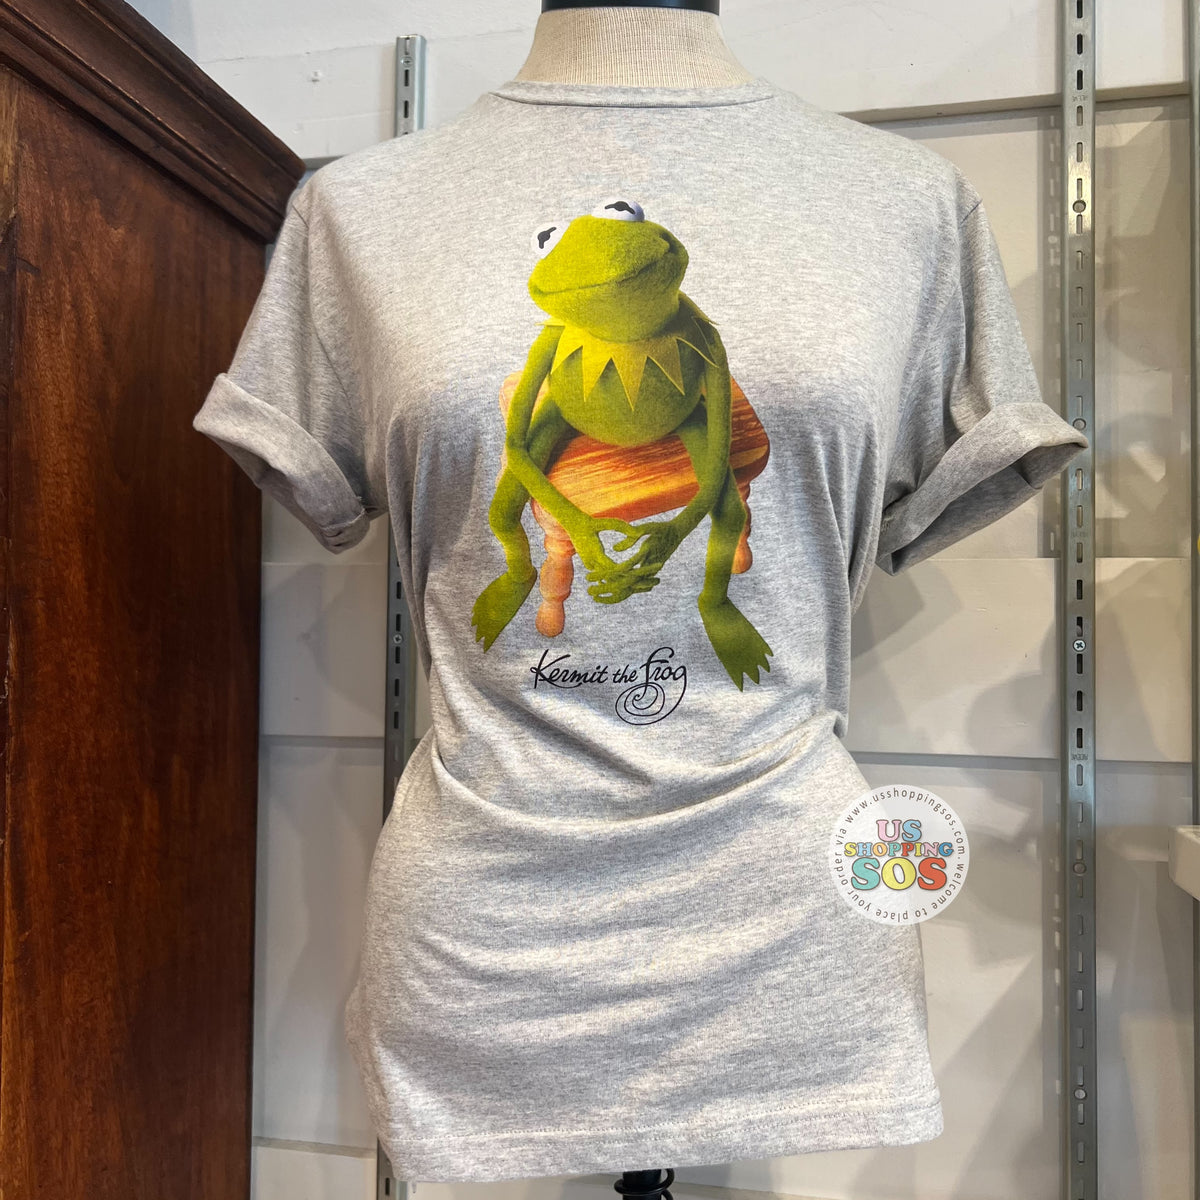 DLR - The Grey the T-shirt Frog Graphic Kermit Muppets (Adult) USShoppingSOS Heather —